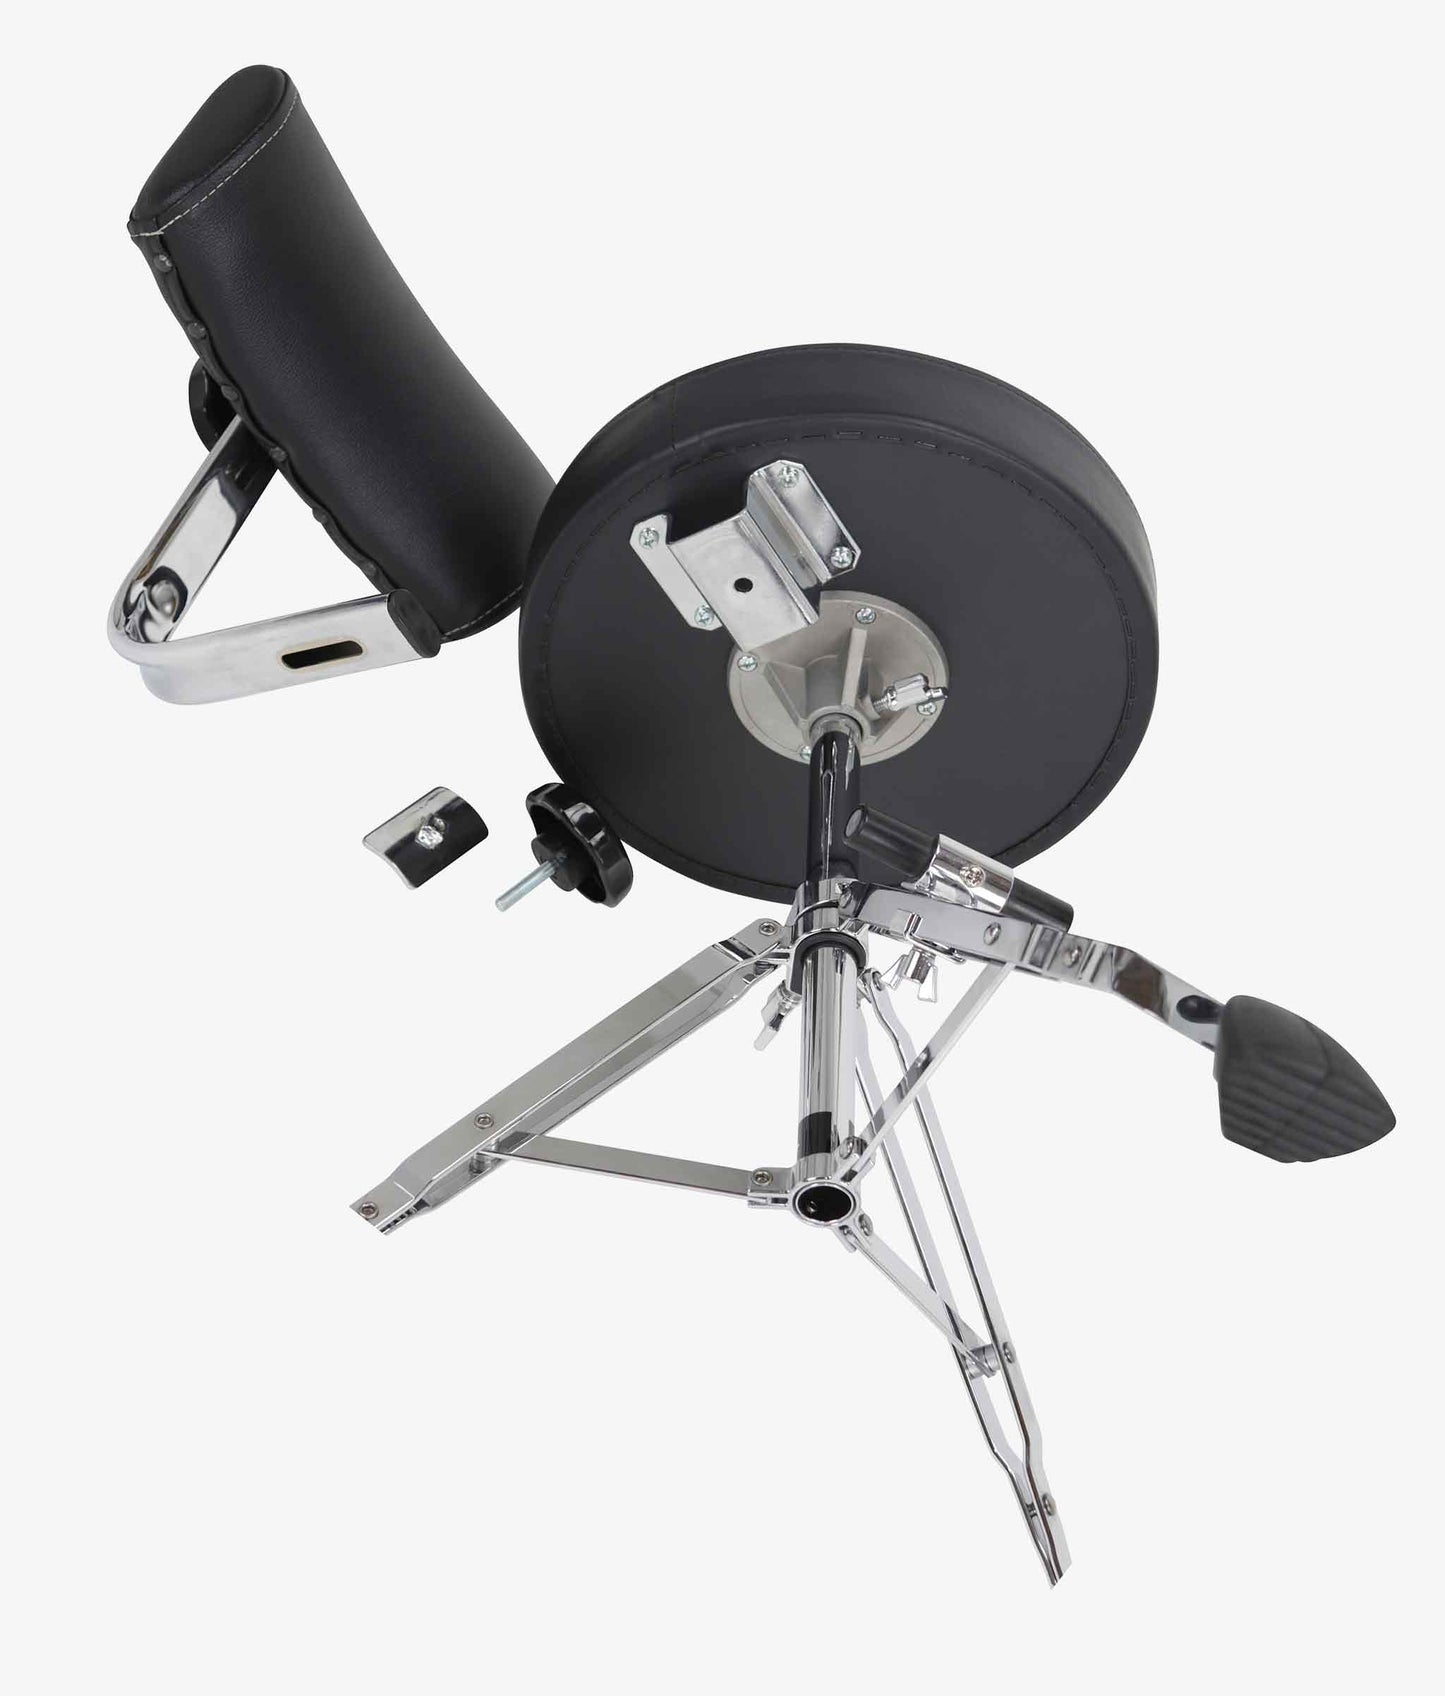  Gibraltar GGS10S 13" Compact Performance Stool with Footrest Drum Hardware